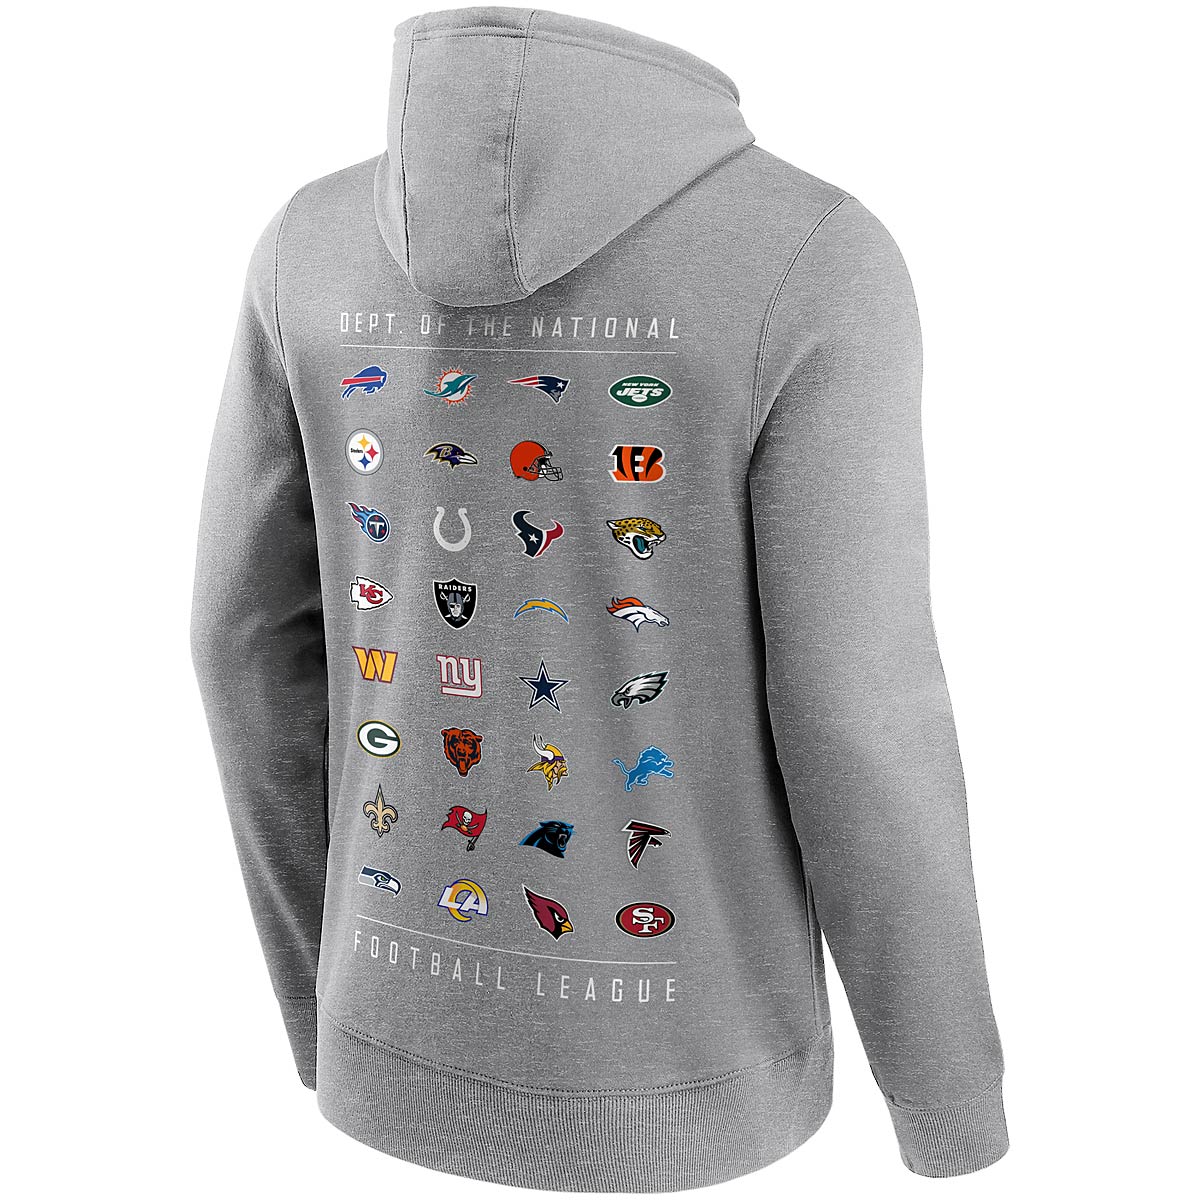 Image of Nike NFL All Team Graphic Hoody, Grey